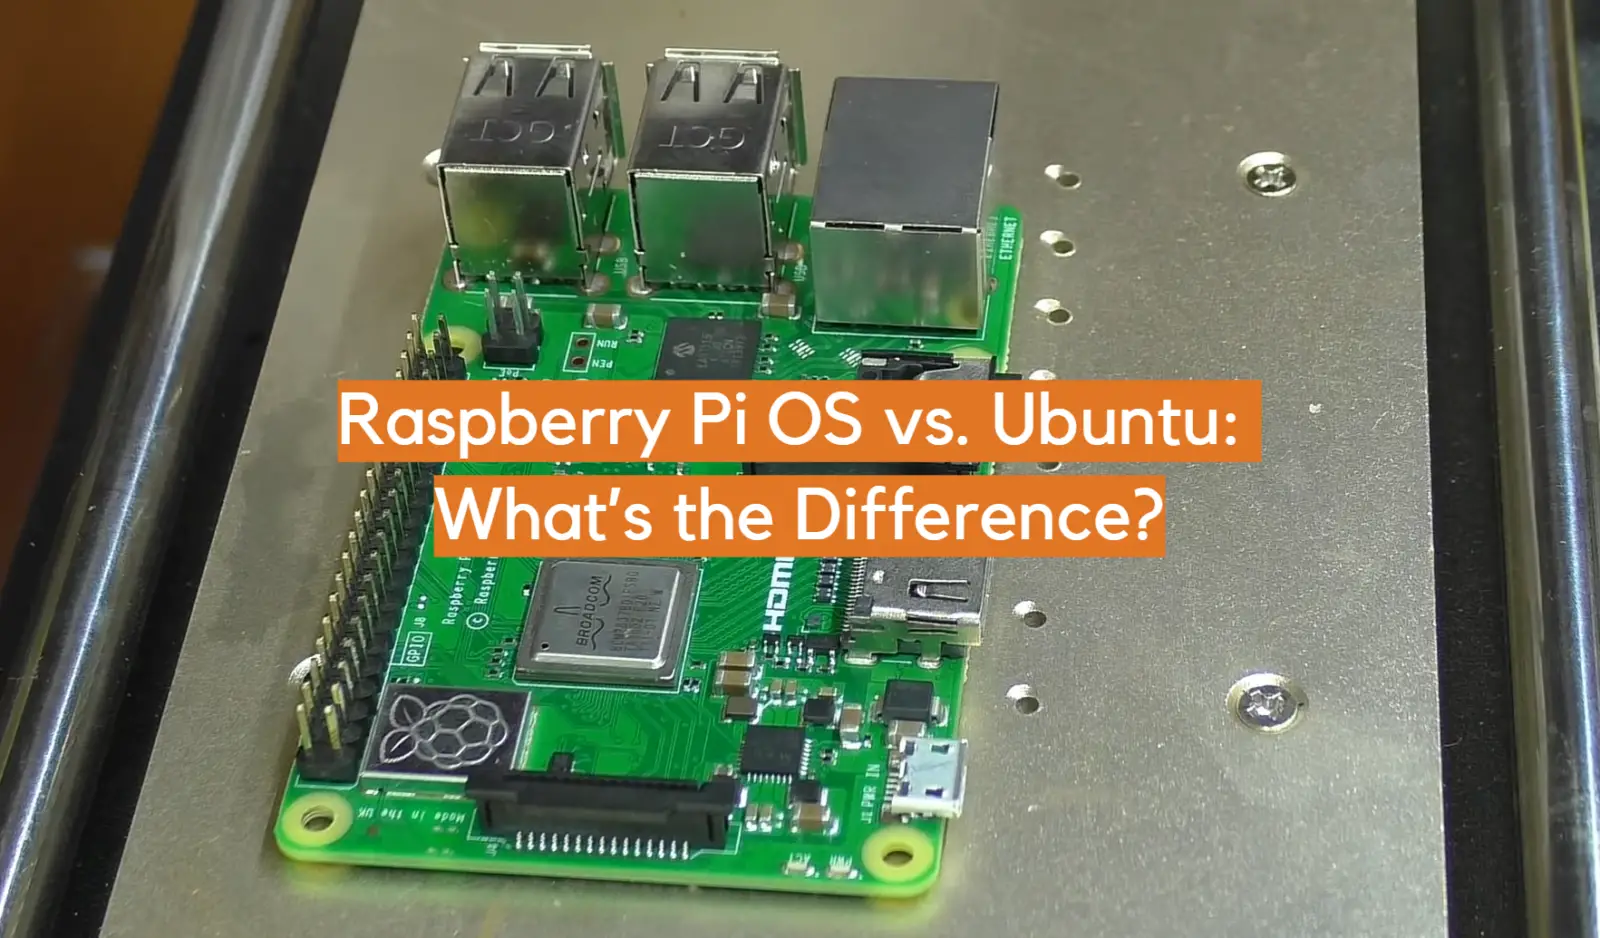 Raspberry Pi OS vs. Ubuntu: What’s the Difference?